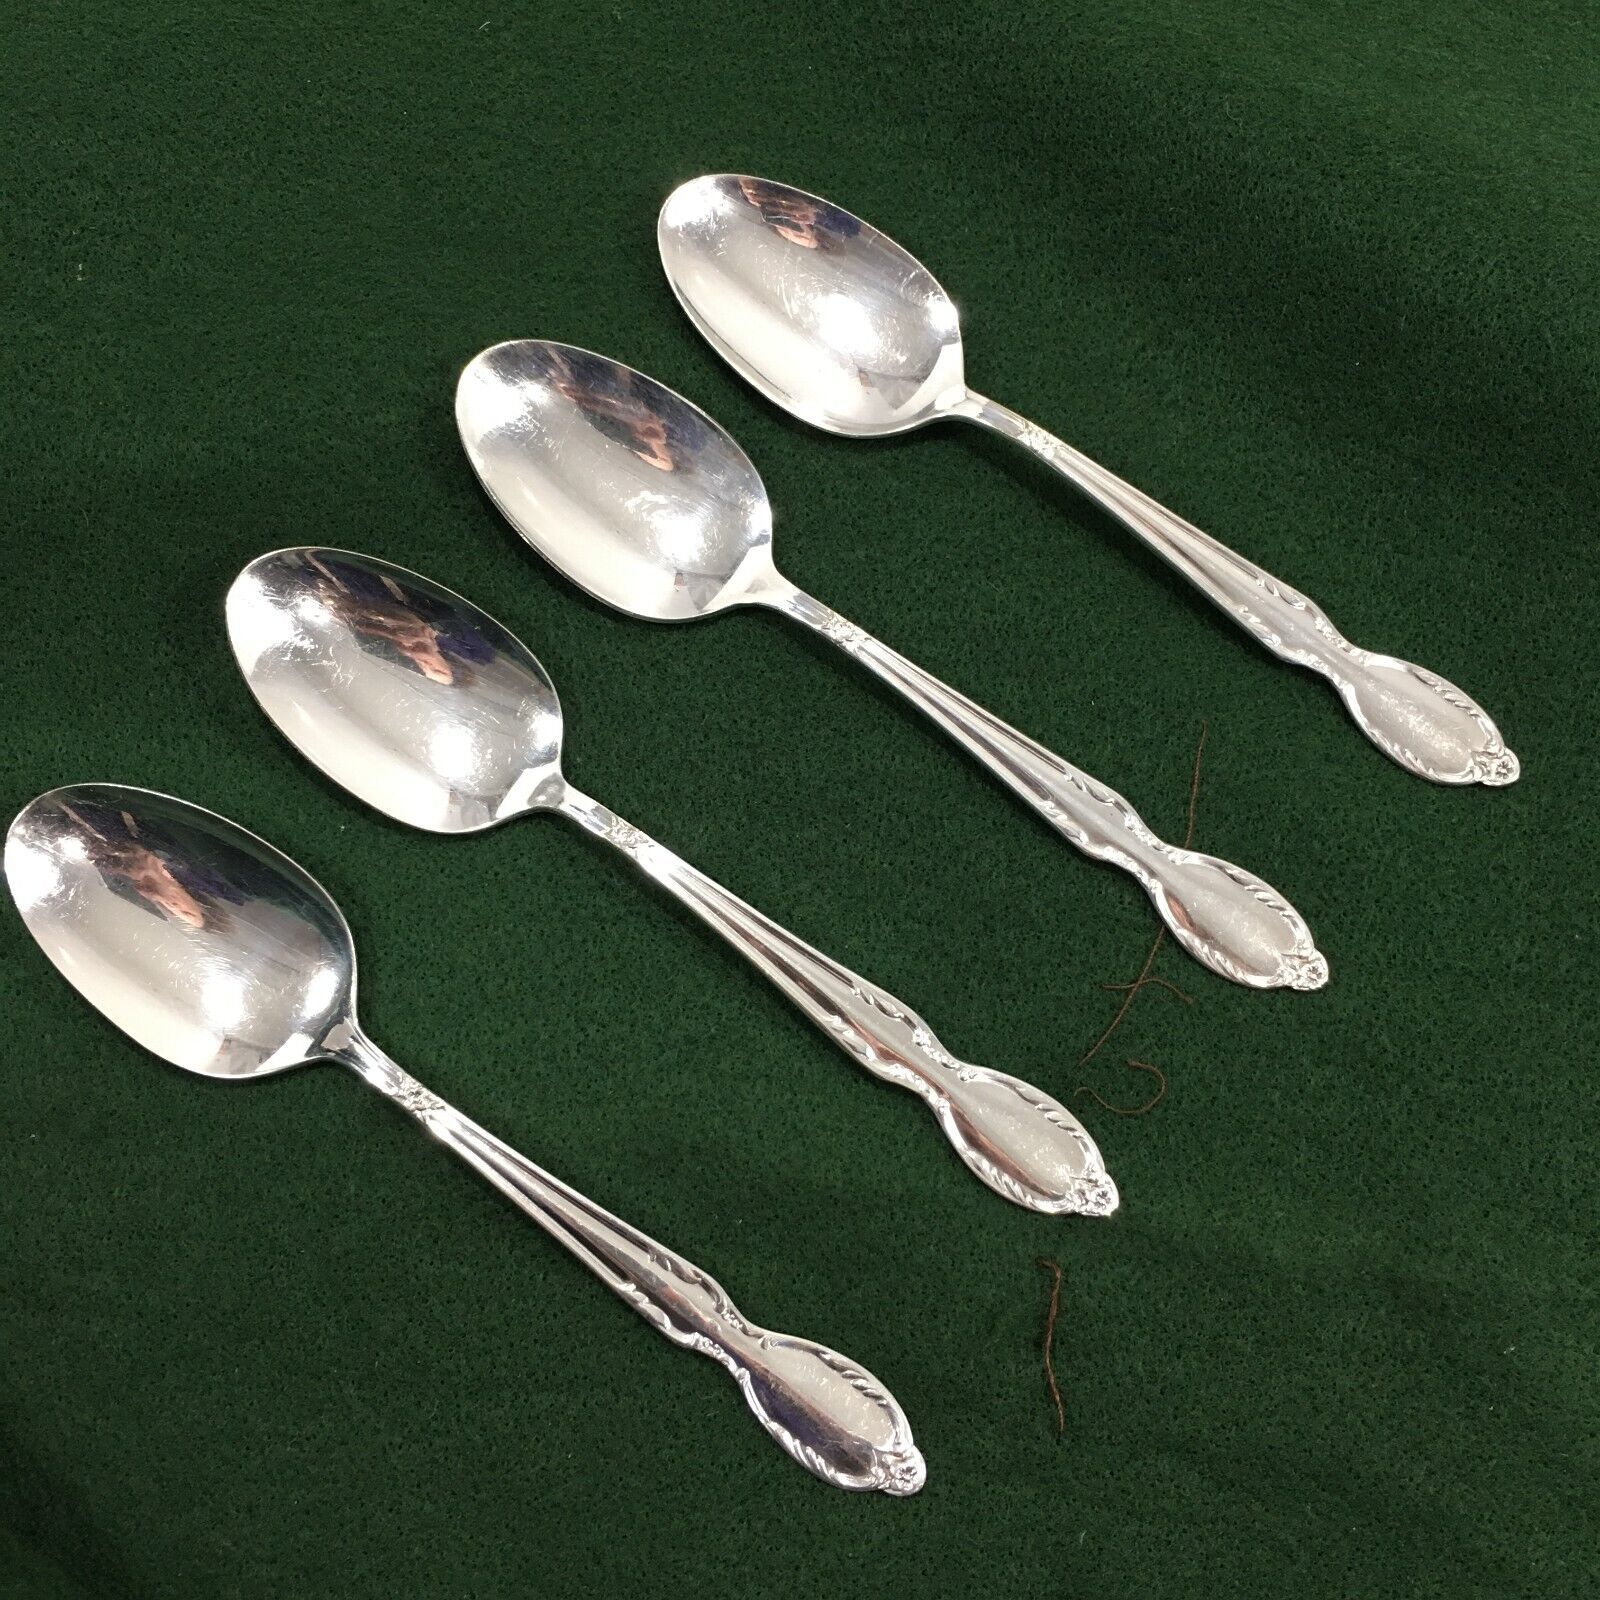 Primary image for Rogers Bros Royal Manor Silverplate Set of 4 Teaspoons 6 1/8" Original Rogers